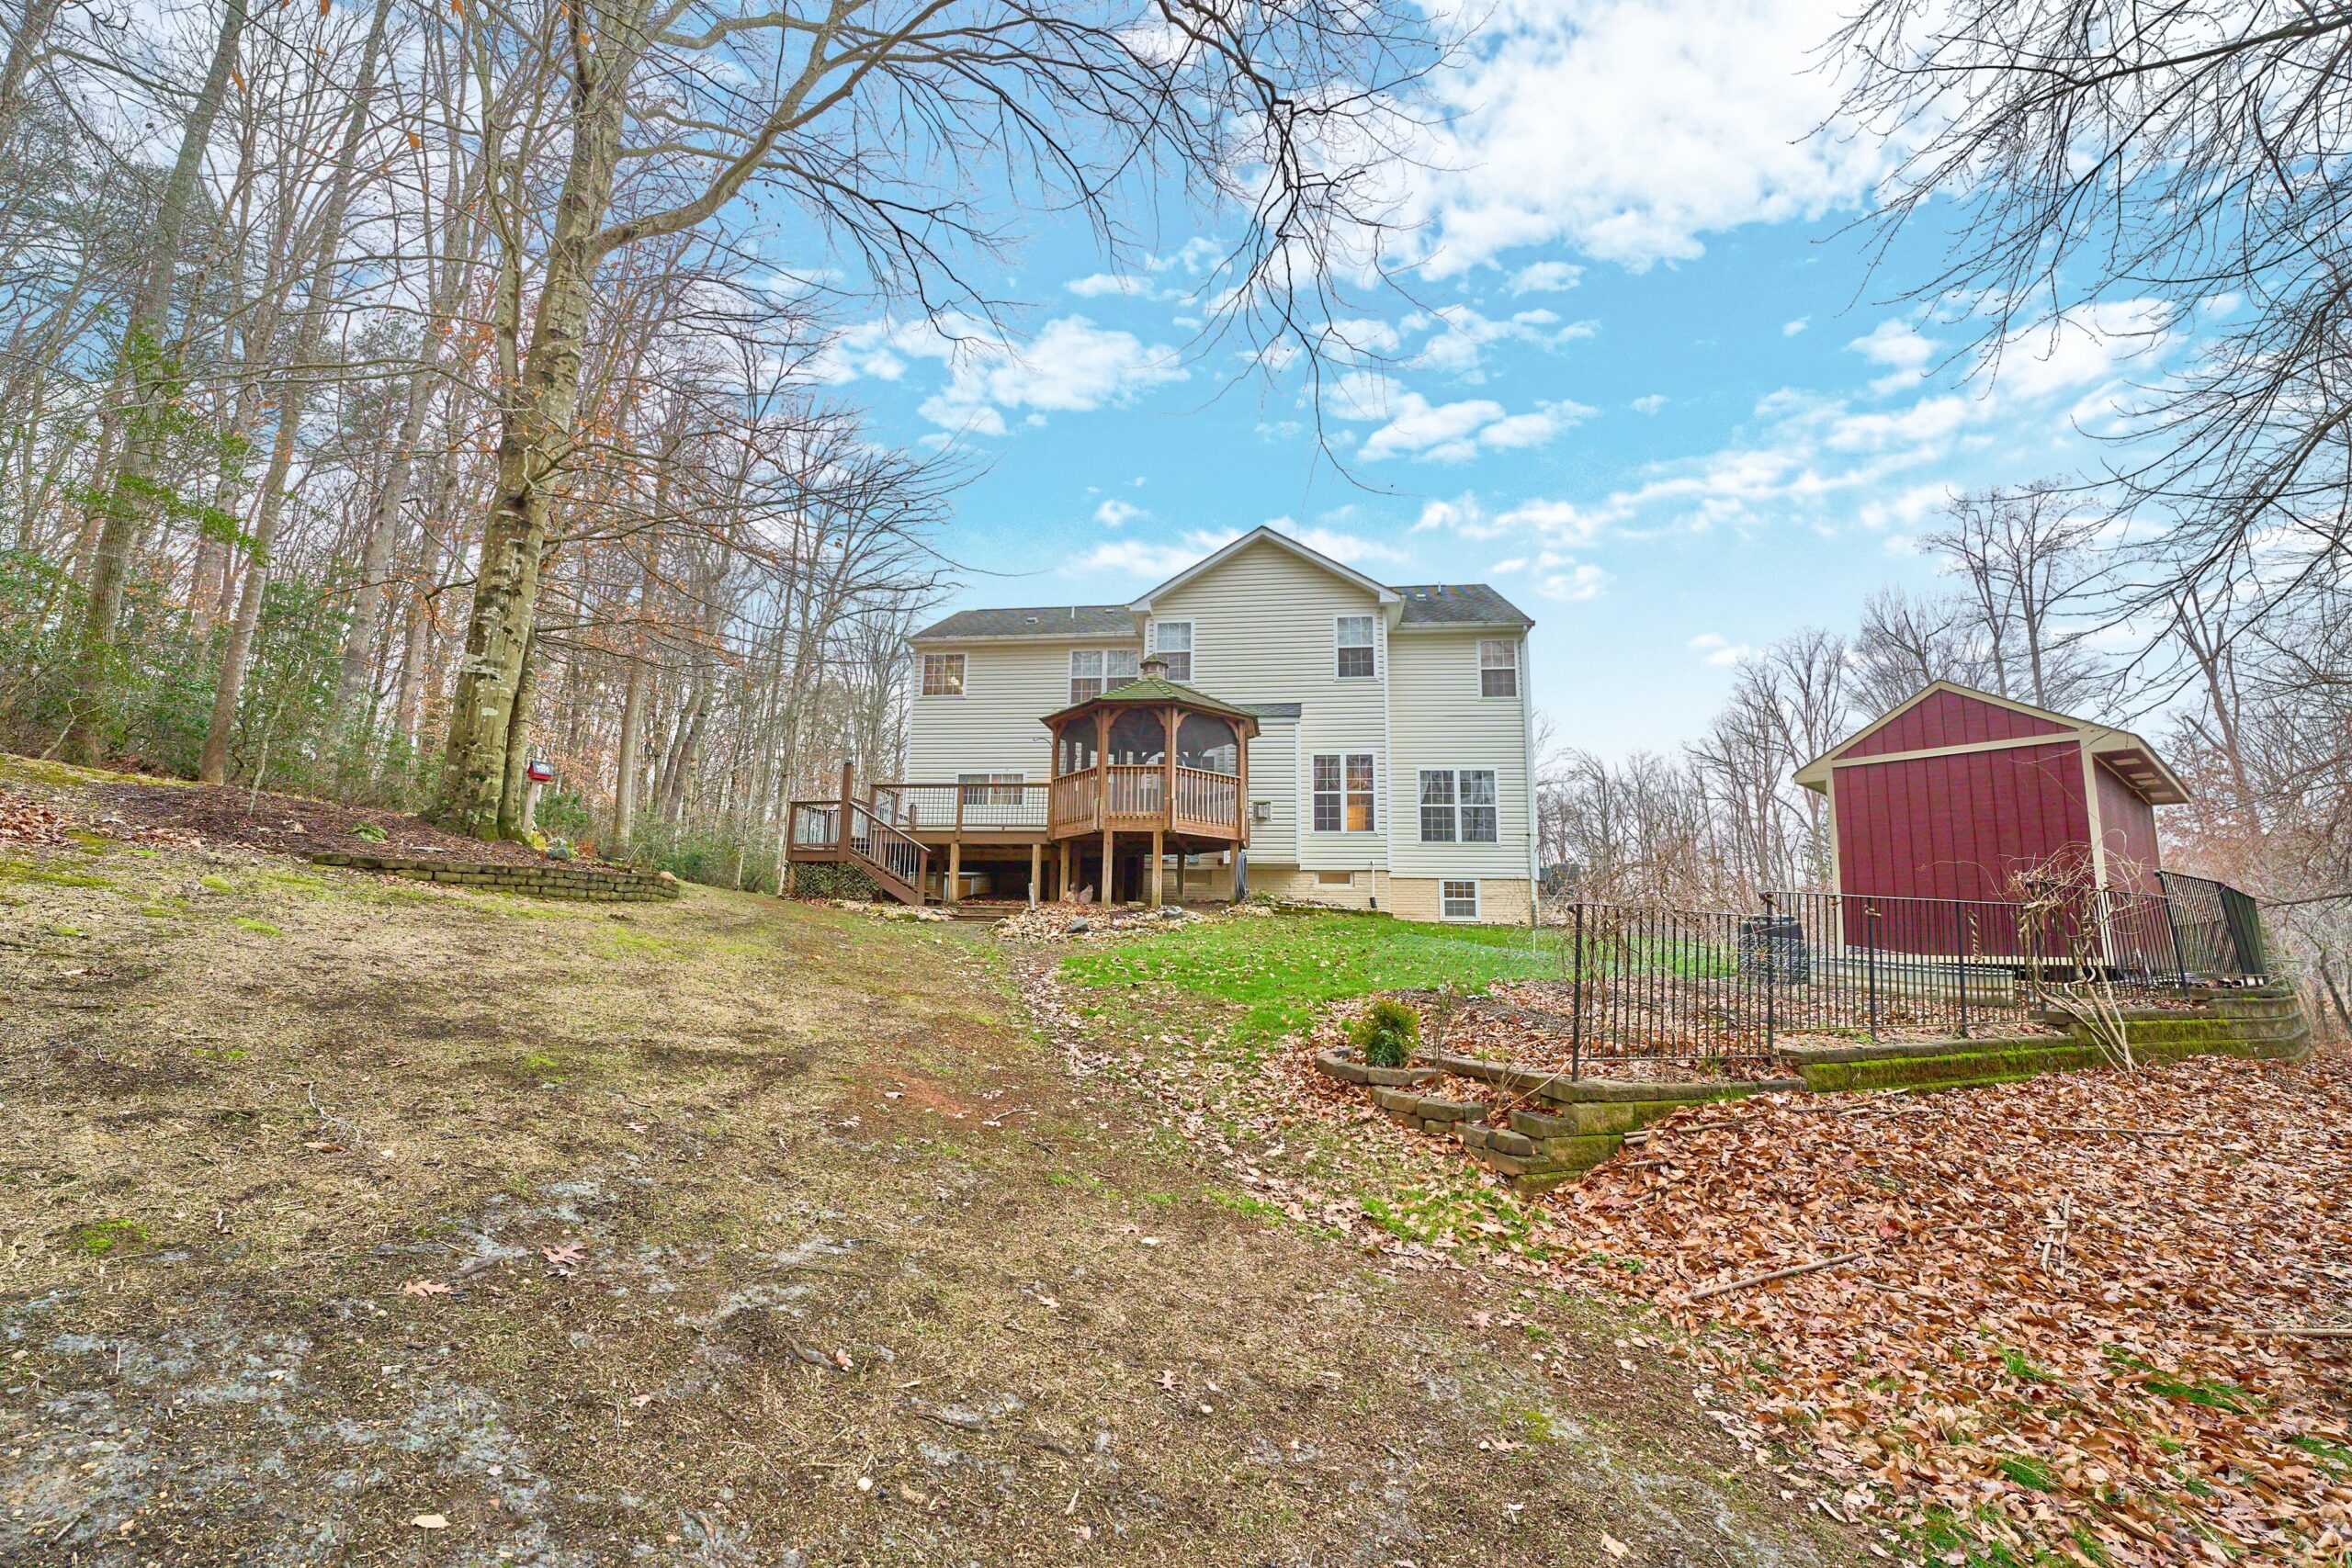 Professional exterior photo of 80 Brentsmill Drive in Stafford, Virginia - showing the rear of the home looking up from down a hill. Can see red shed in foreground and rear deck and gazebo